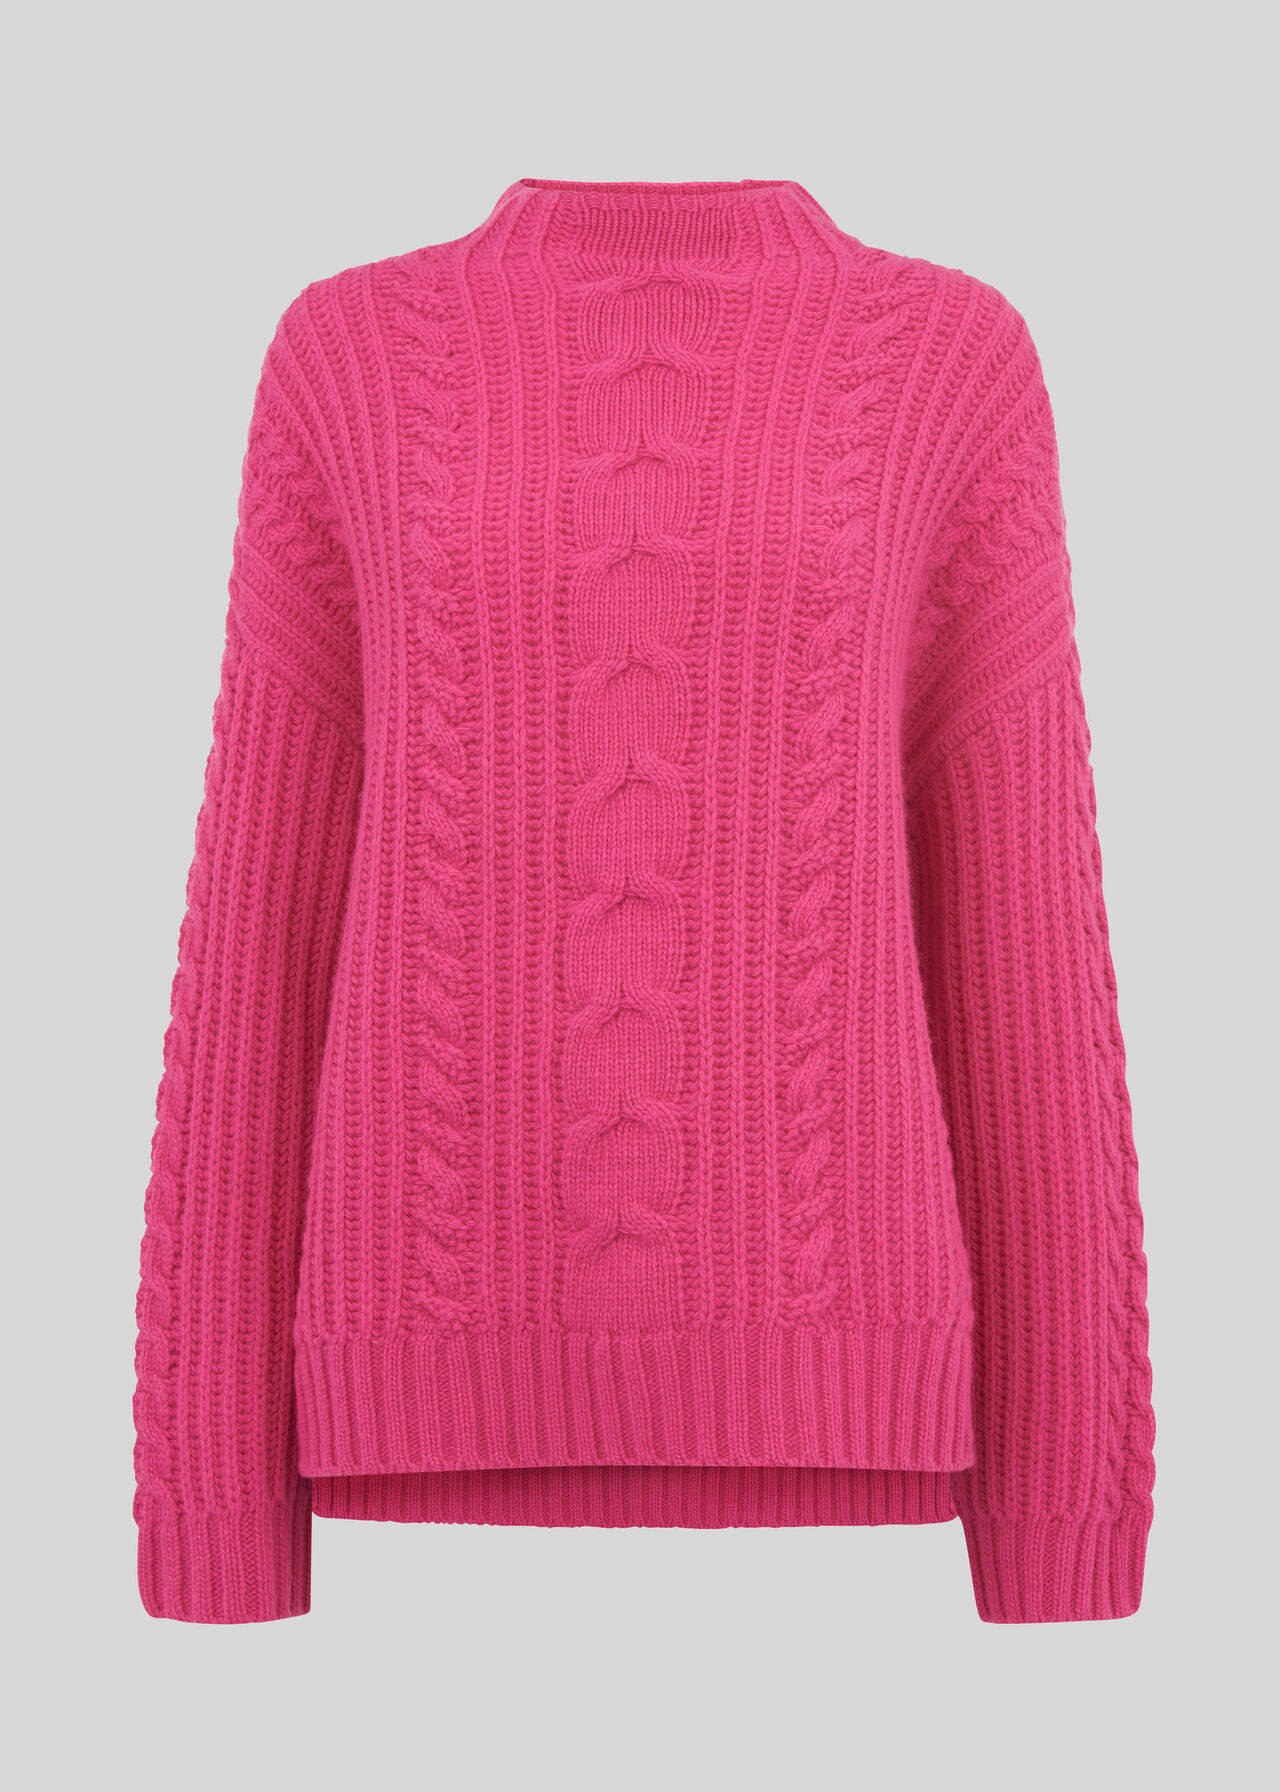 Pink Oversized Chunky Cable Sweater | WHISTLES | Whistles UK